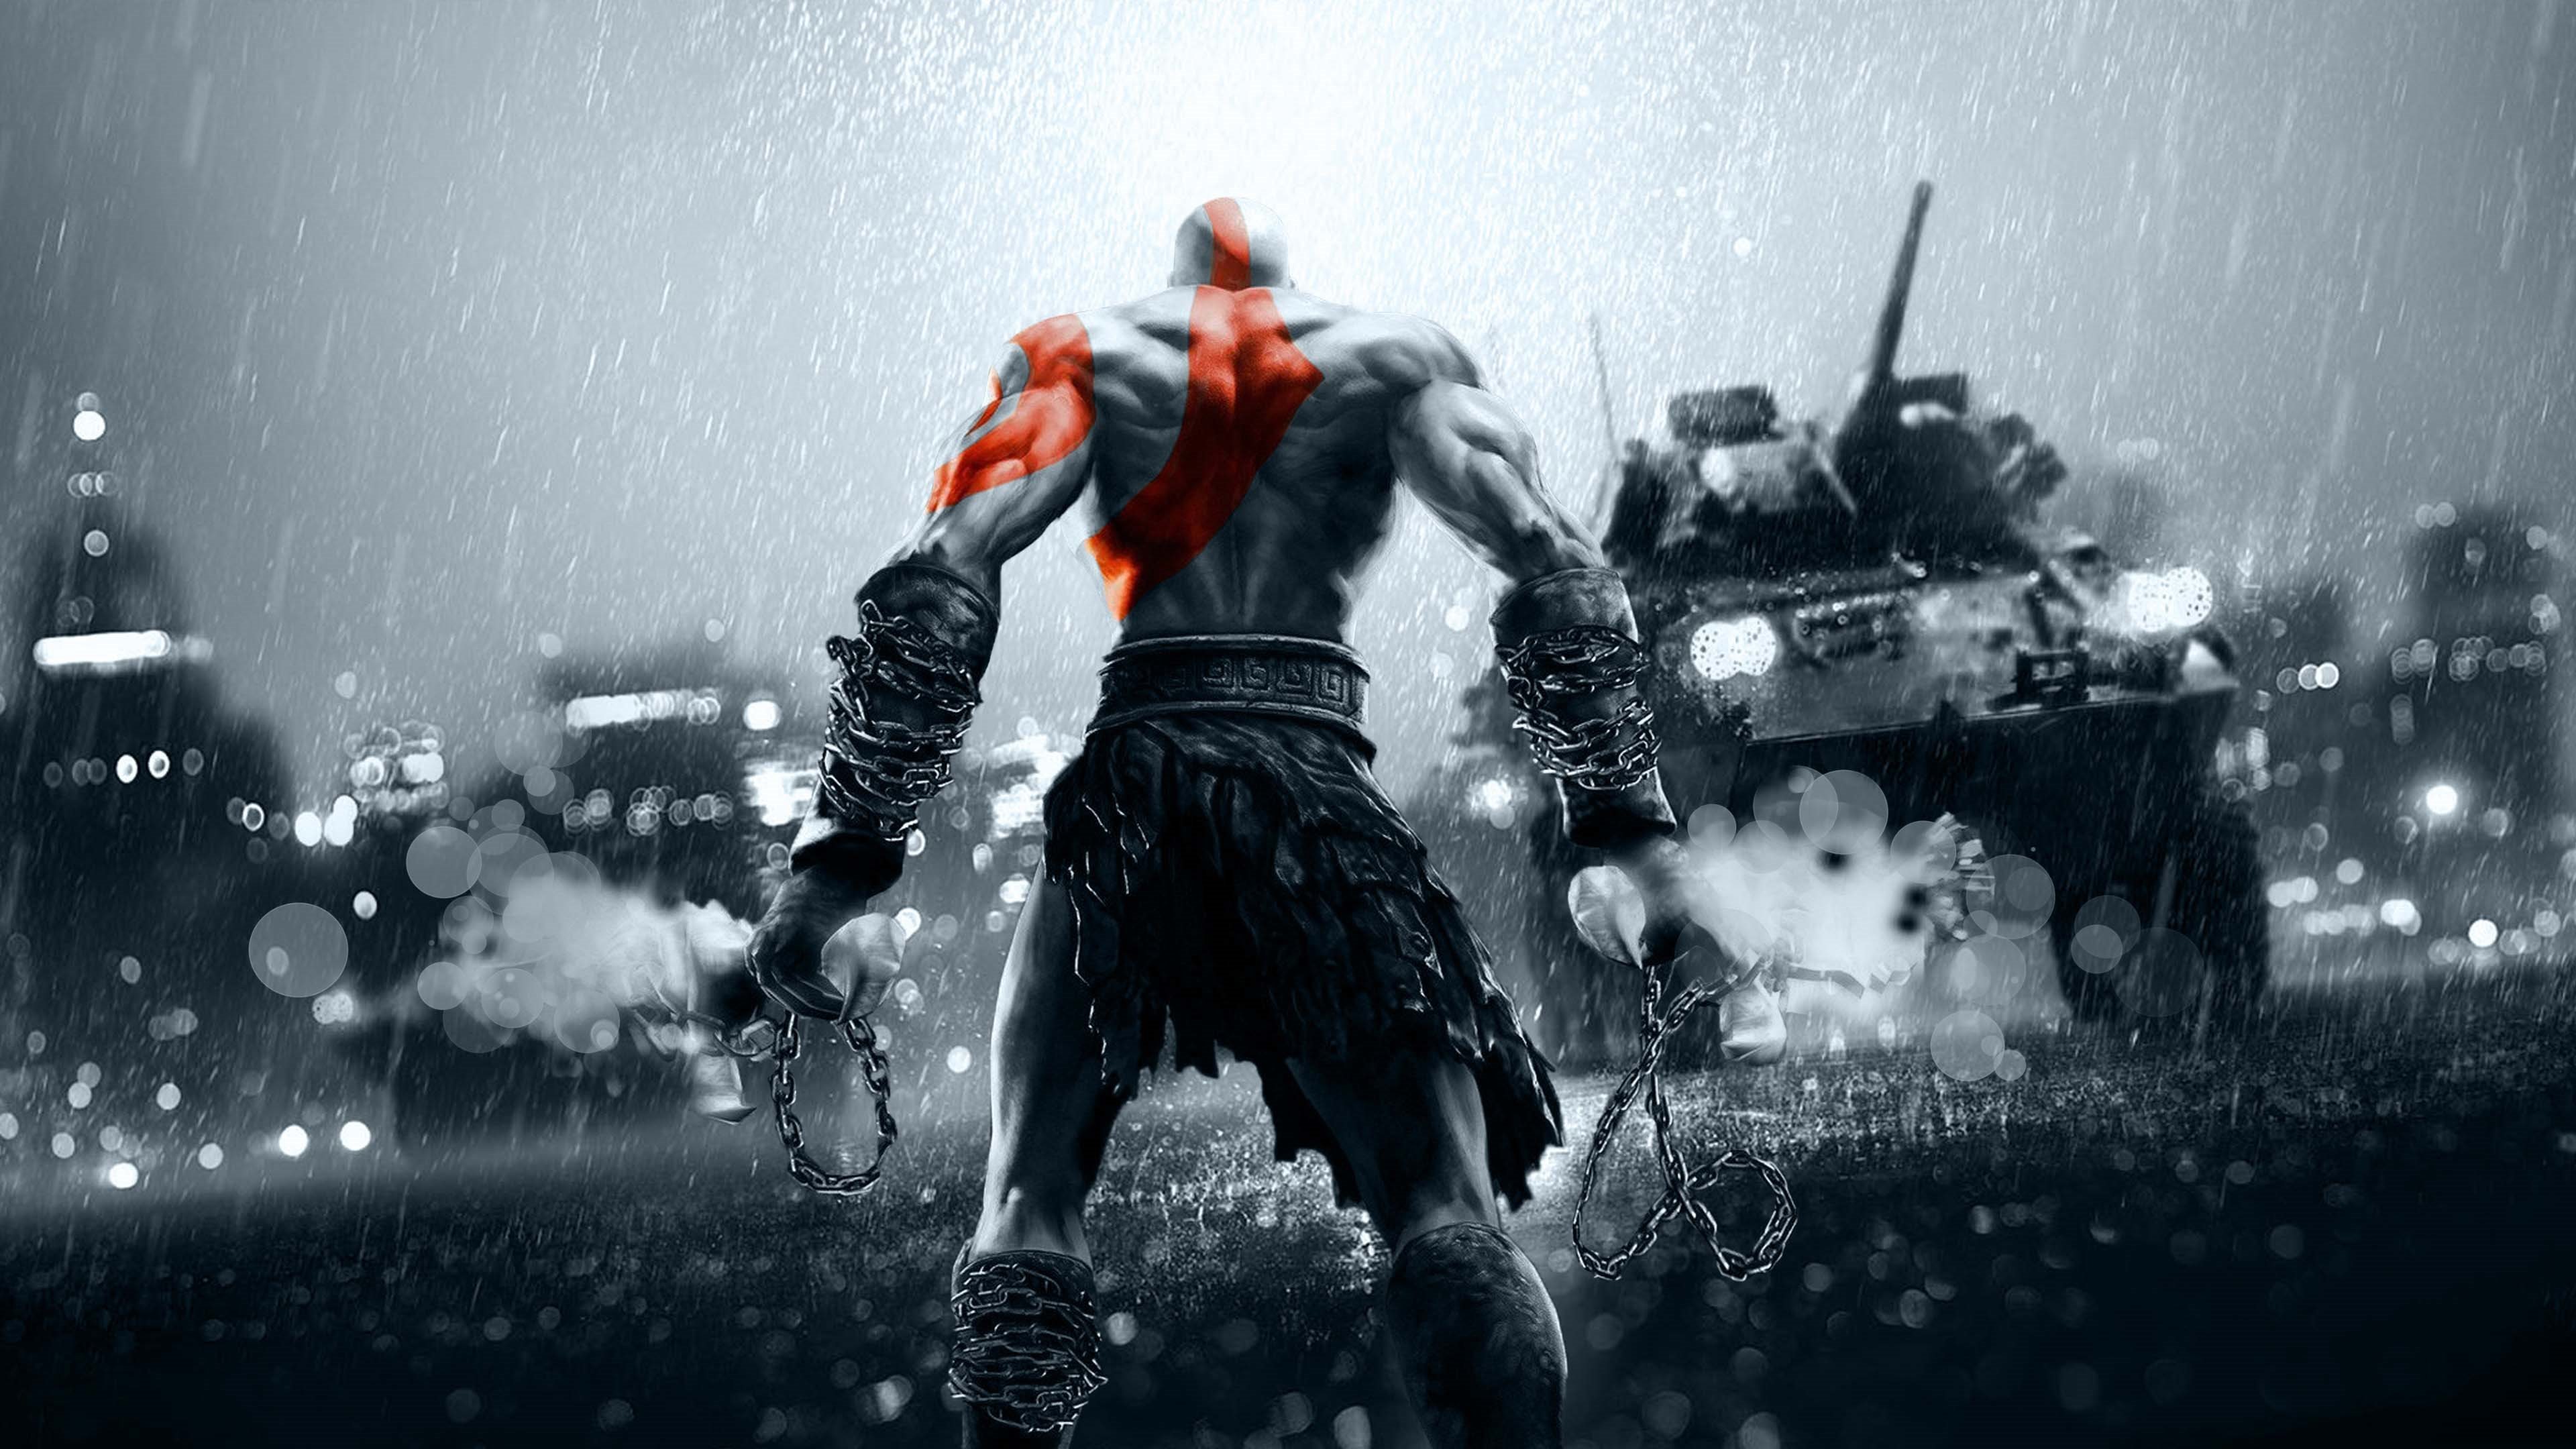 3840x2160 really awesome fan art by the famous video game title: God Of War